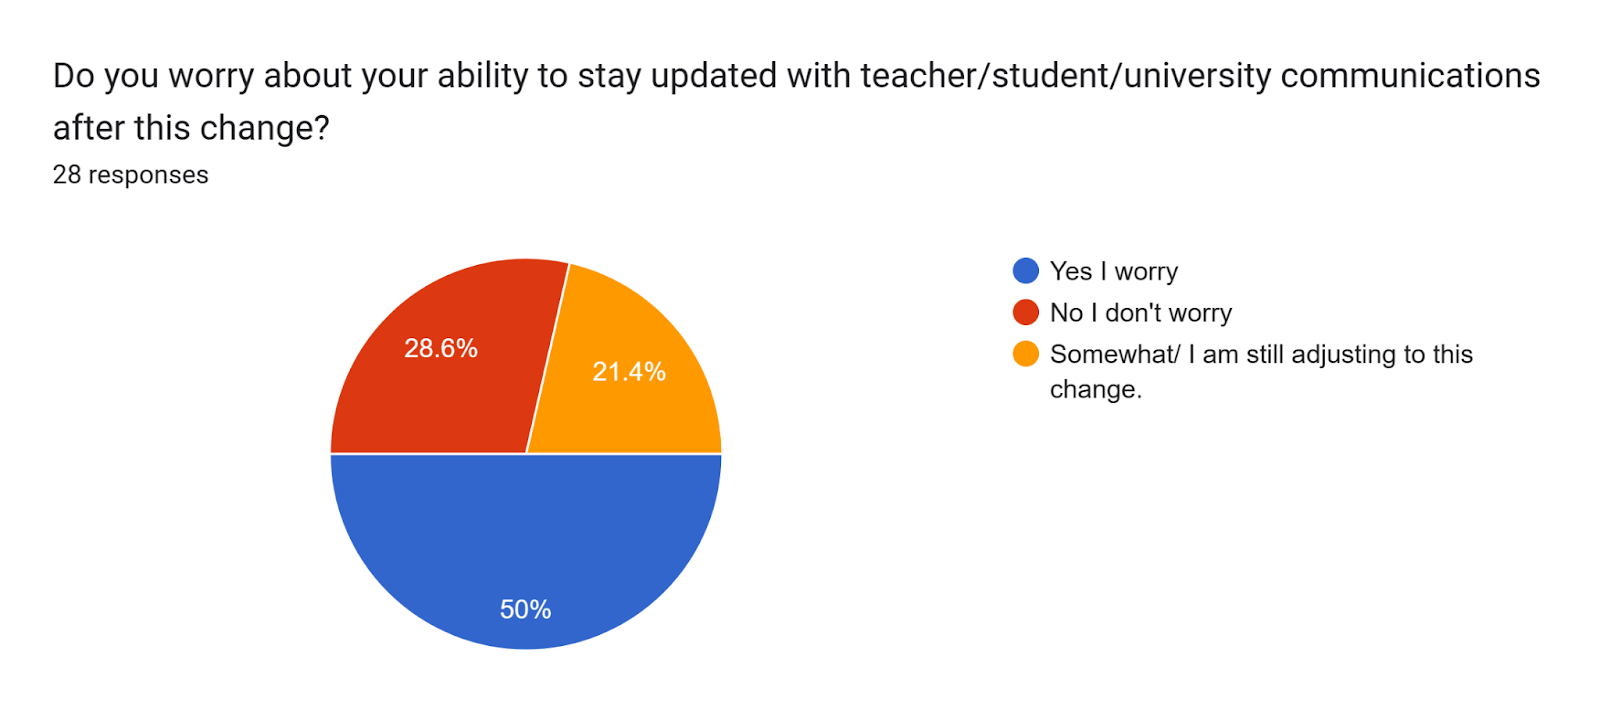 Forms response chart. Question title: Do you worry about your ability to stay updated with teacher/student/university communications after this change?. Number of responses: 28 responses.